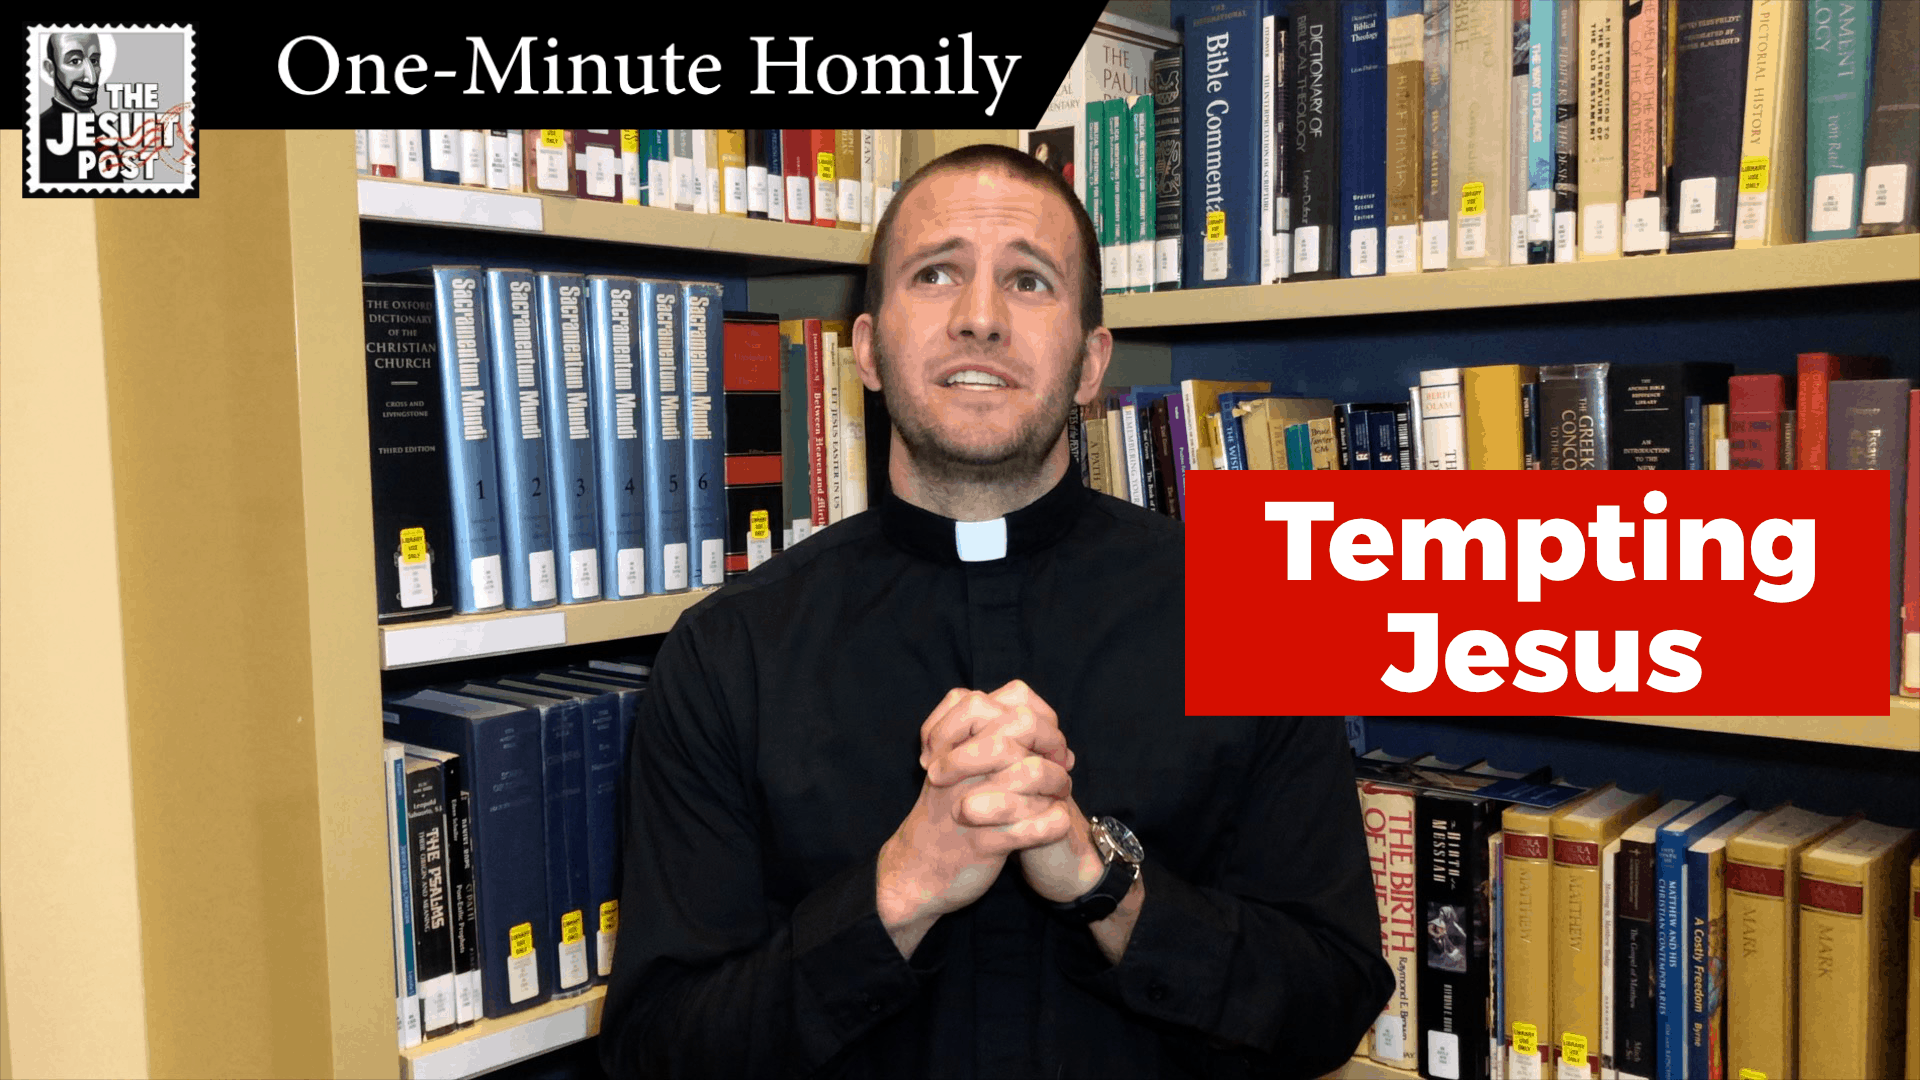 One-Minute Homily: “Tempting Jesus”